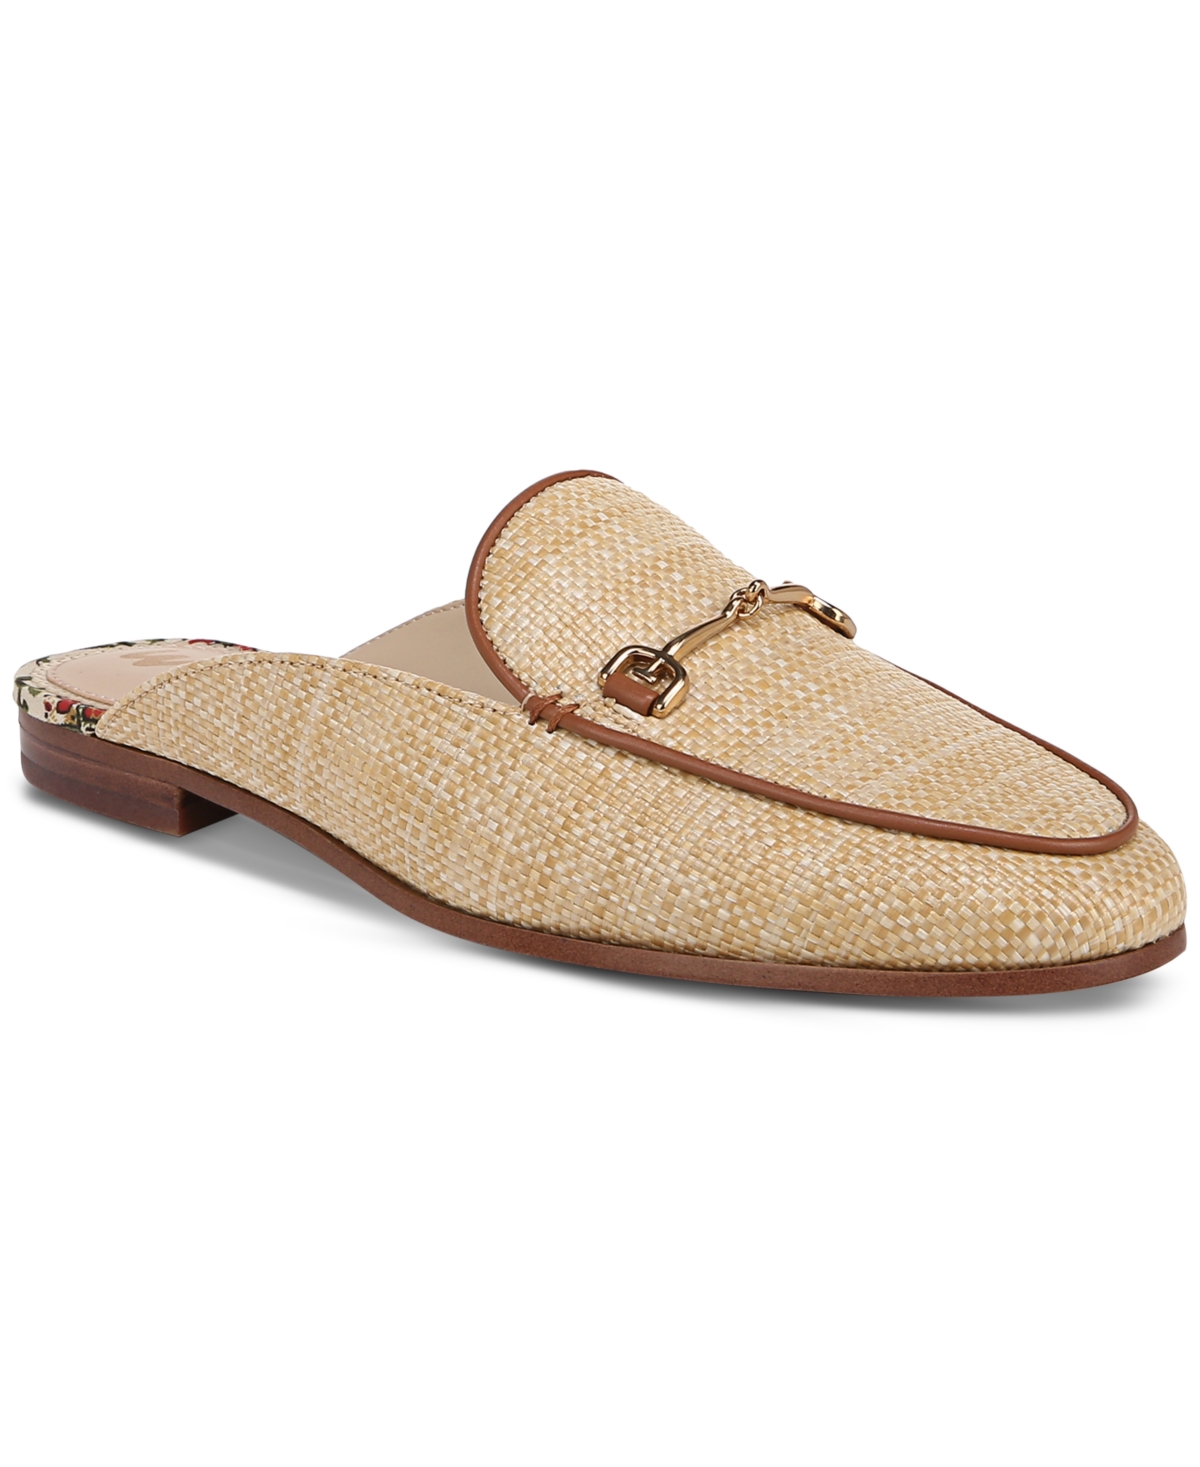 Women's Linnie Tailored Mules - Saddle Leather